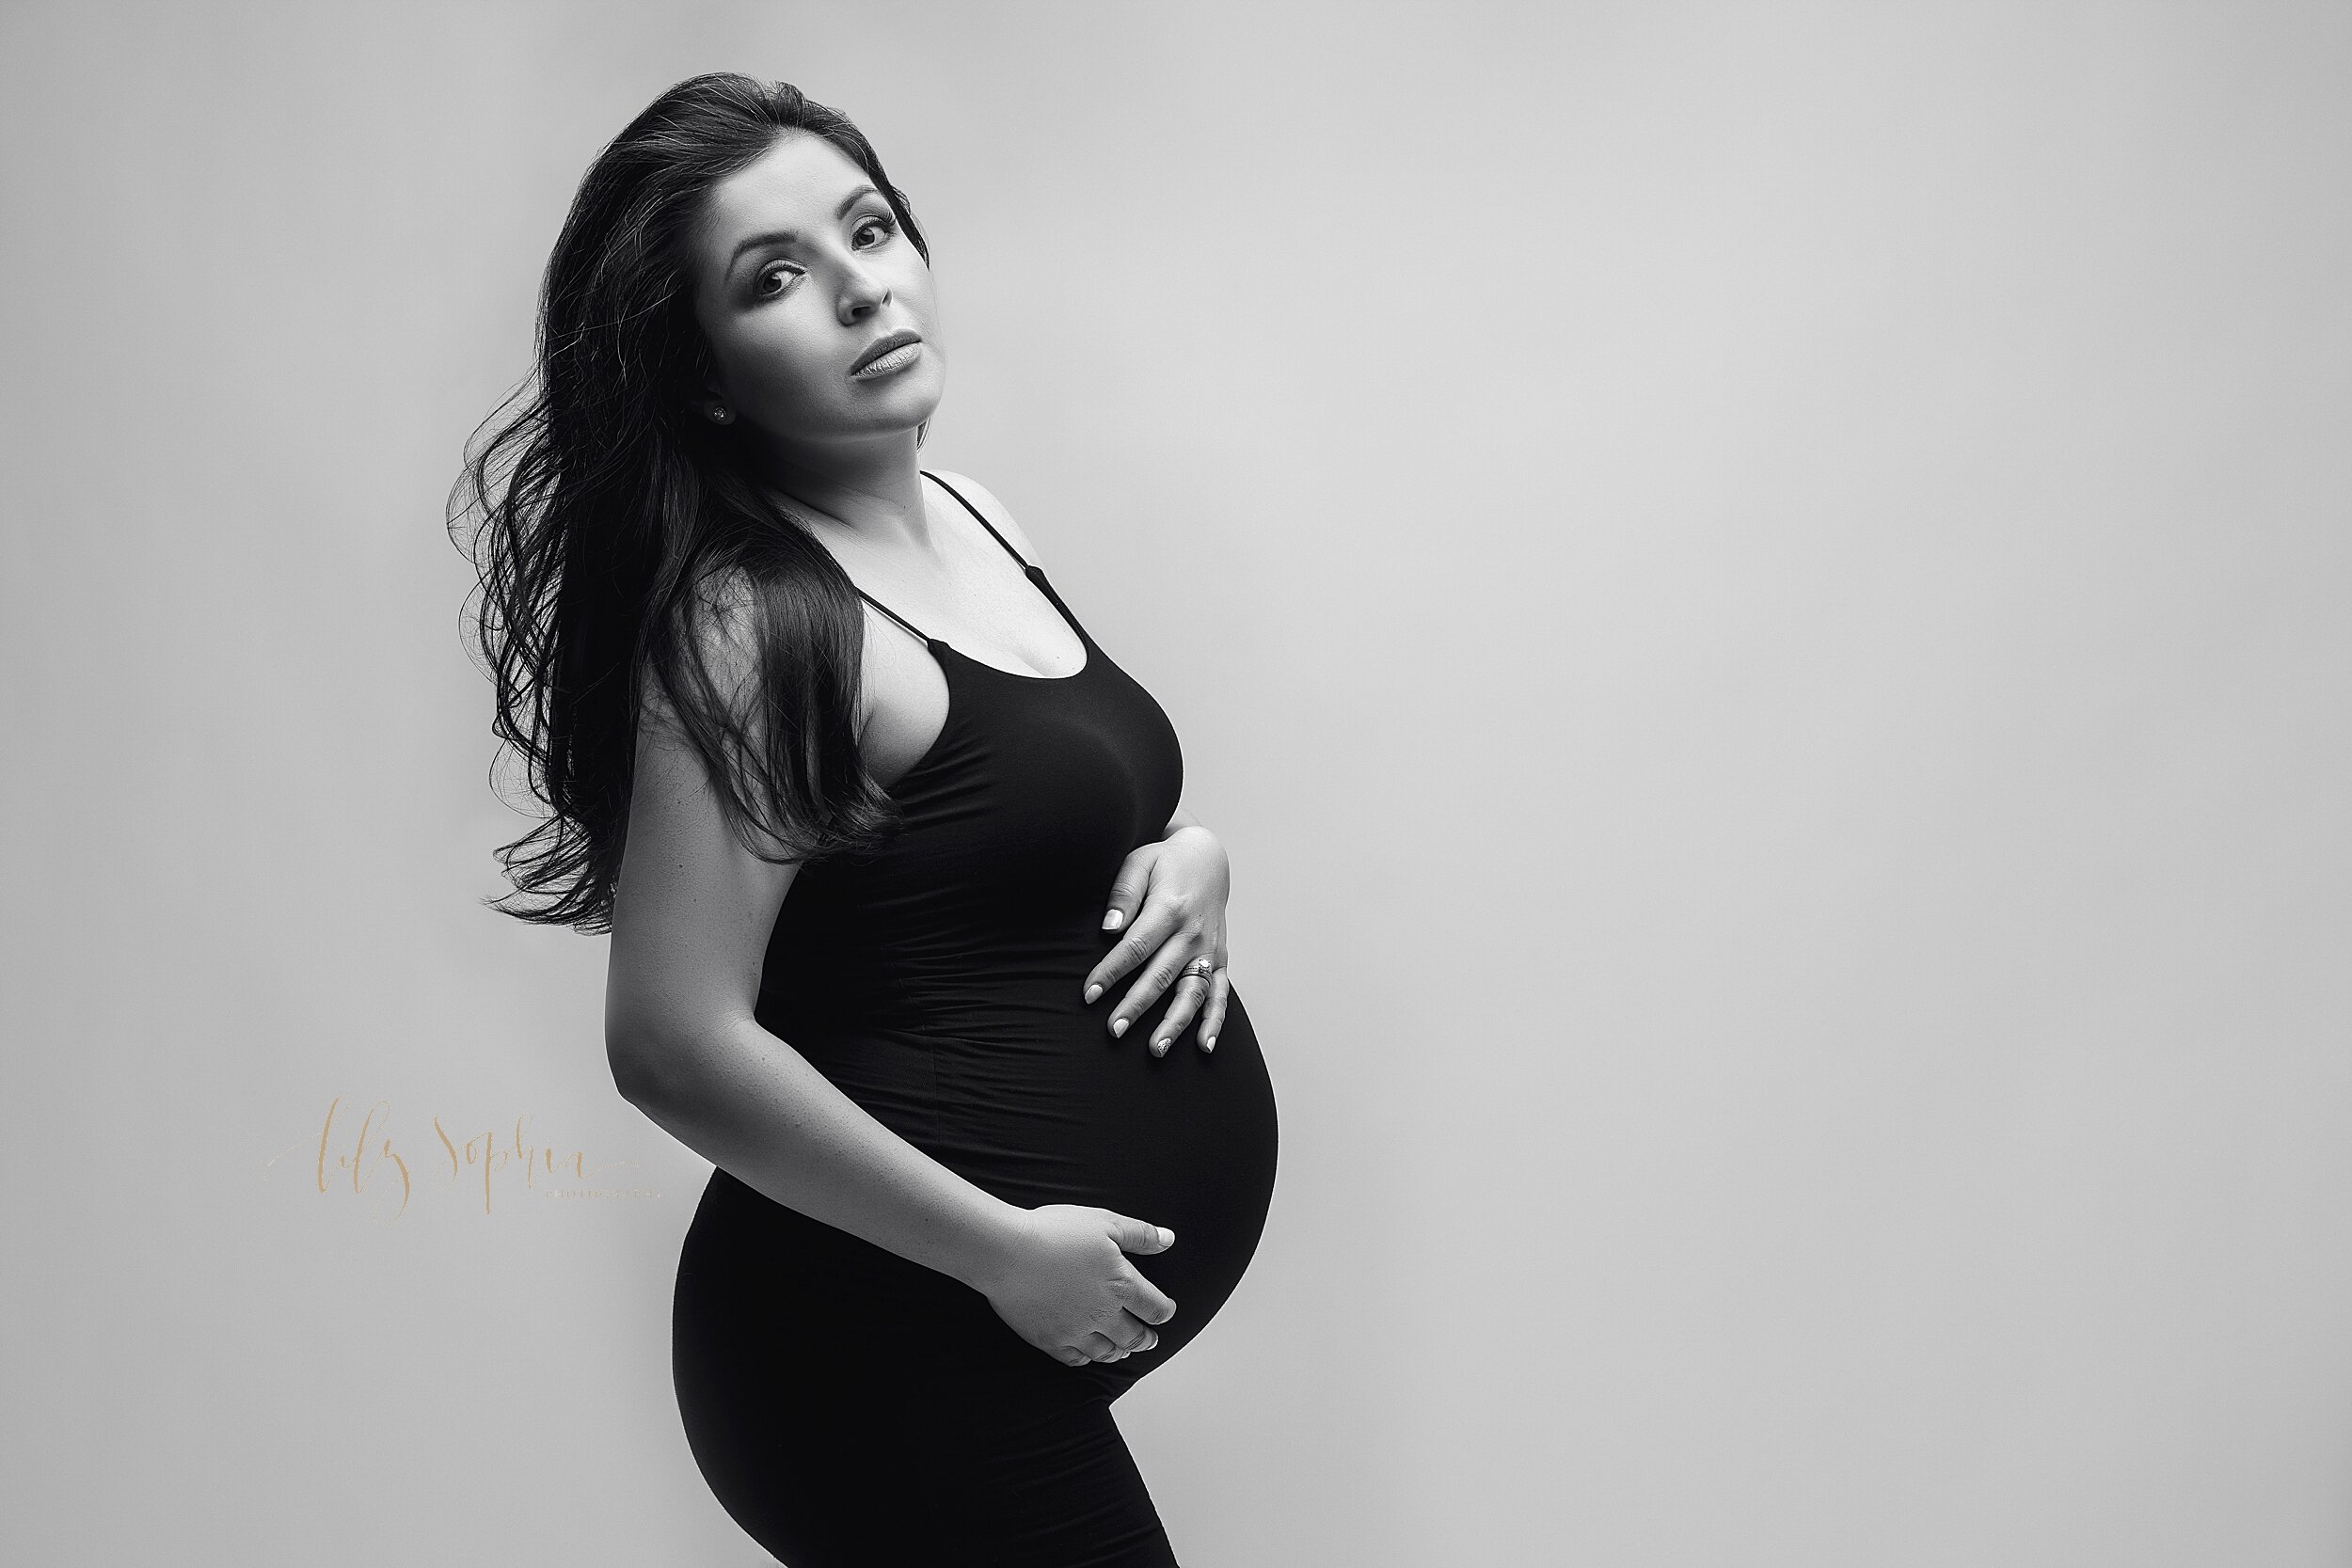  A black and white fine art maternity photo of a pregnant Hispanic woman with long hair blowing in the wind and wearing a black body con dress with spaghetti straps. She is cradling her pregnant belly and has a powerful gaze.  